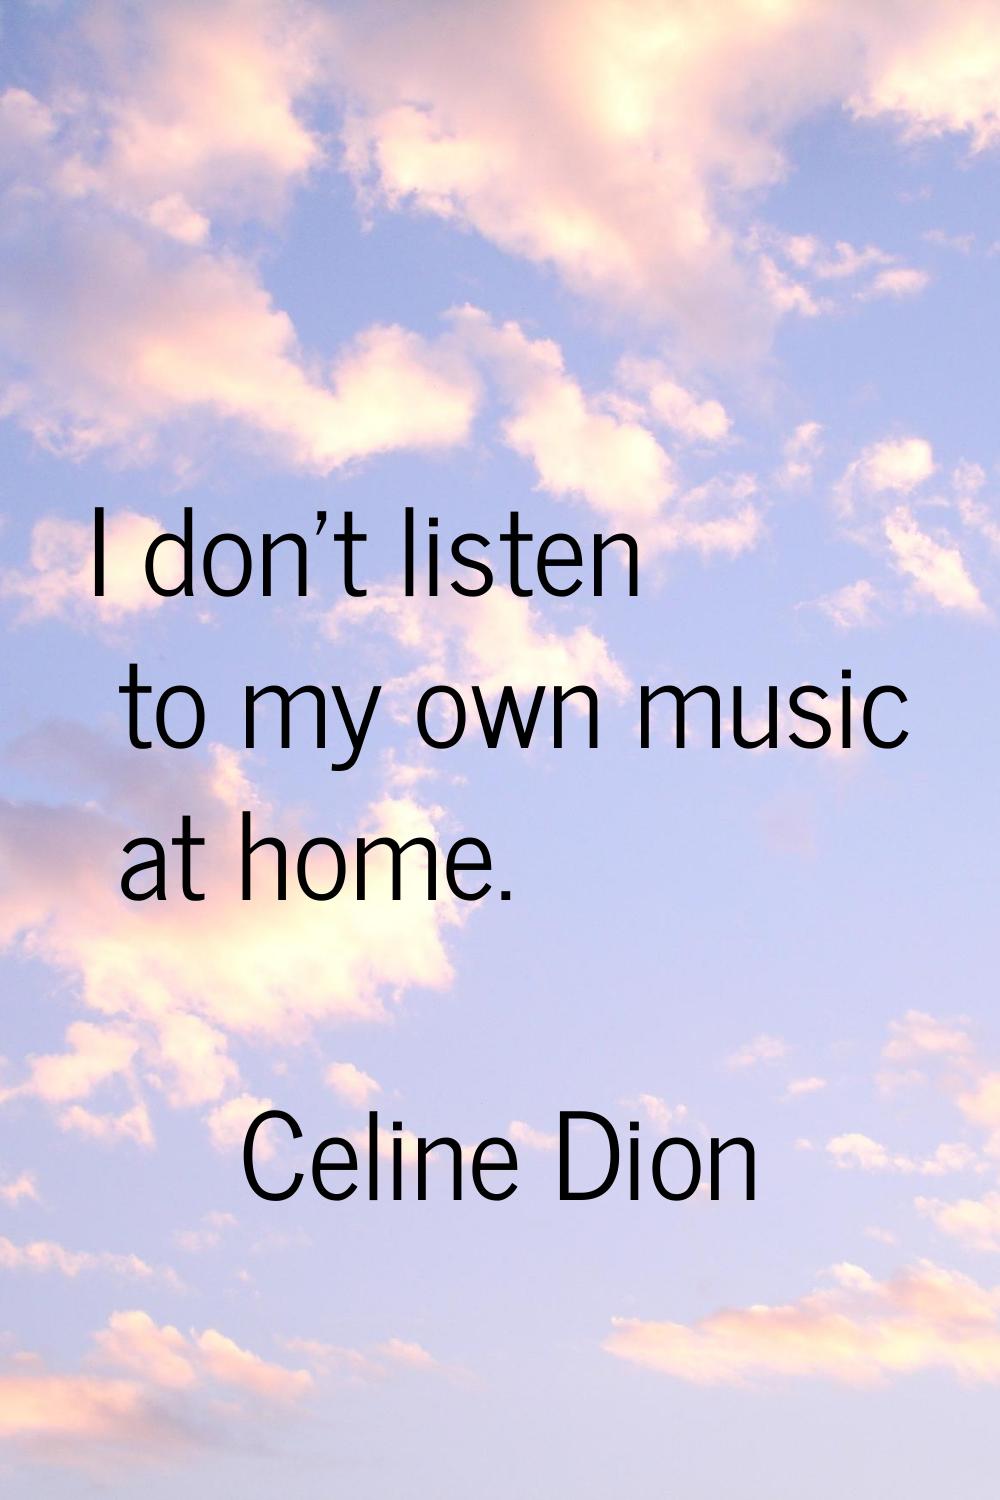 I don't listen to my own music at home.